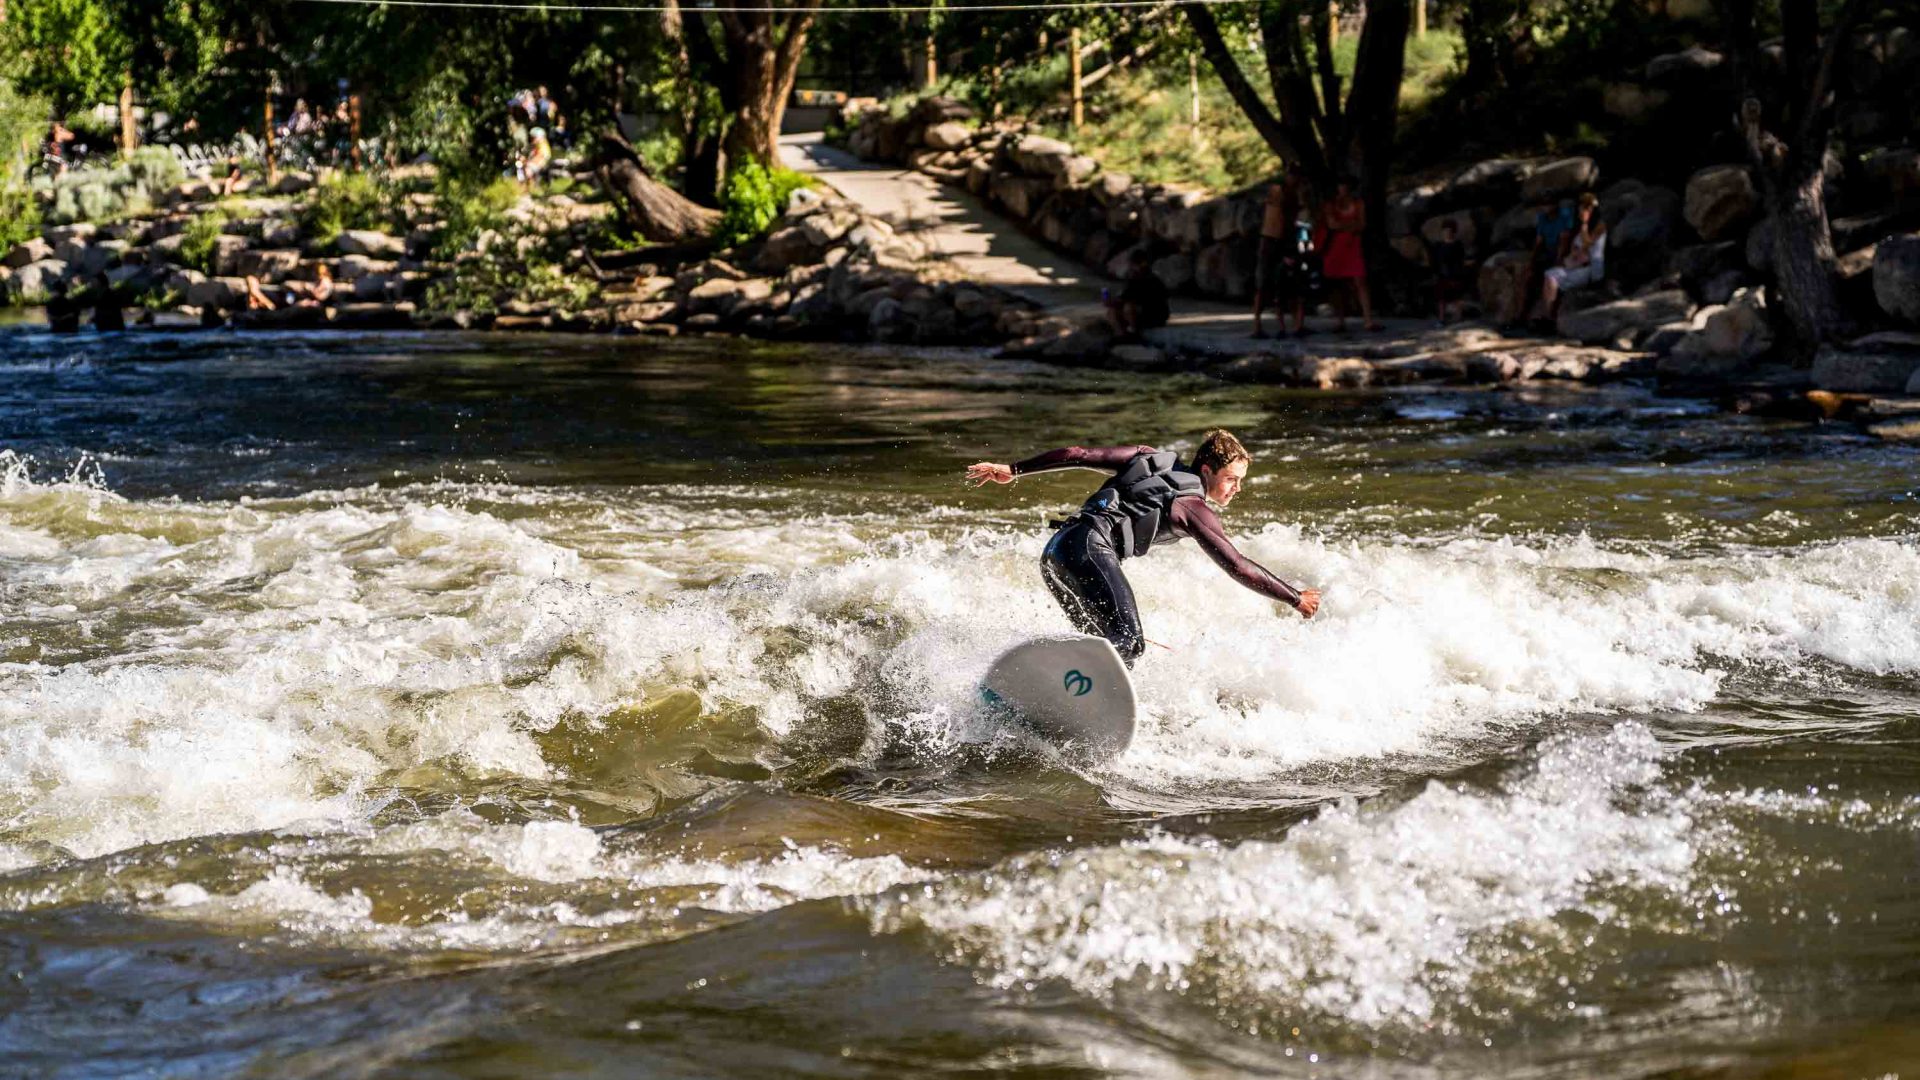 A man surfing on the river.